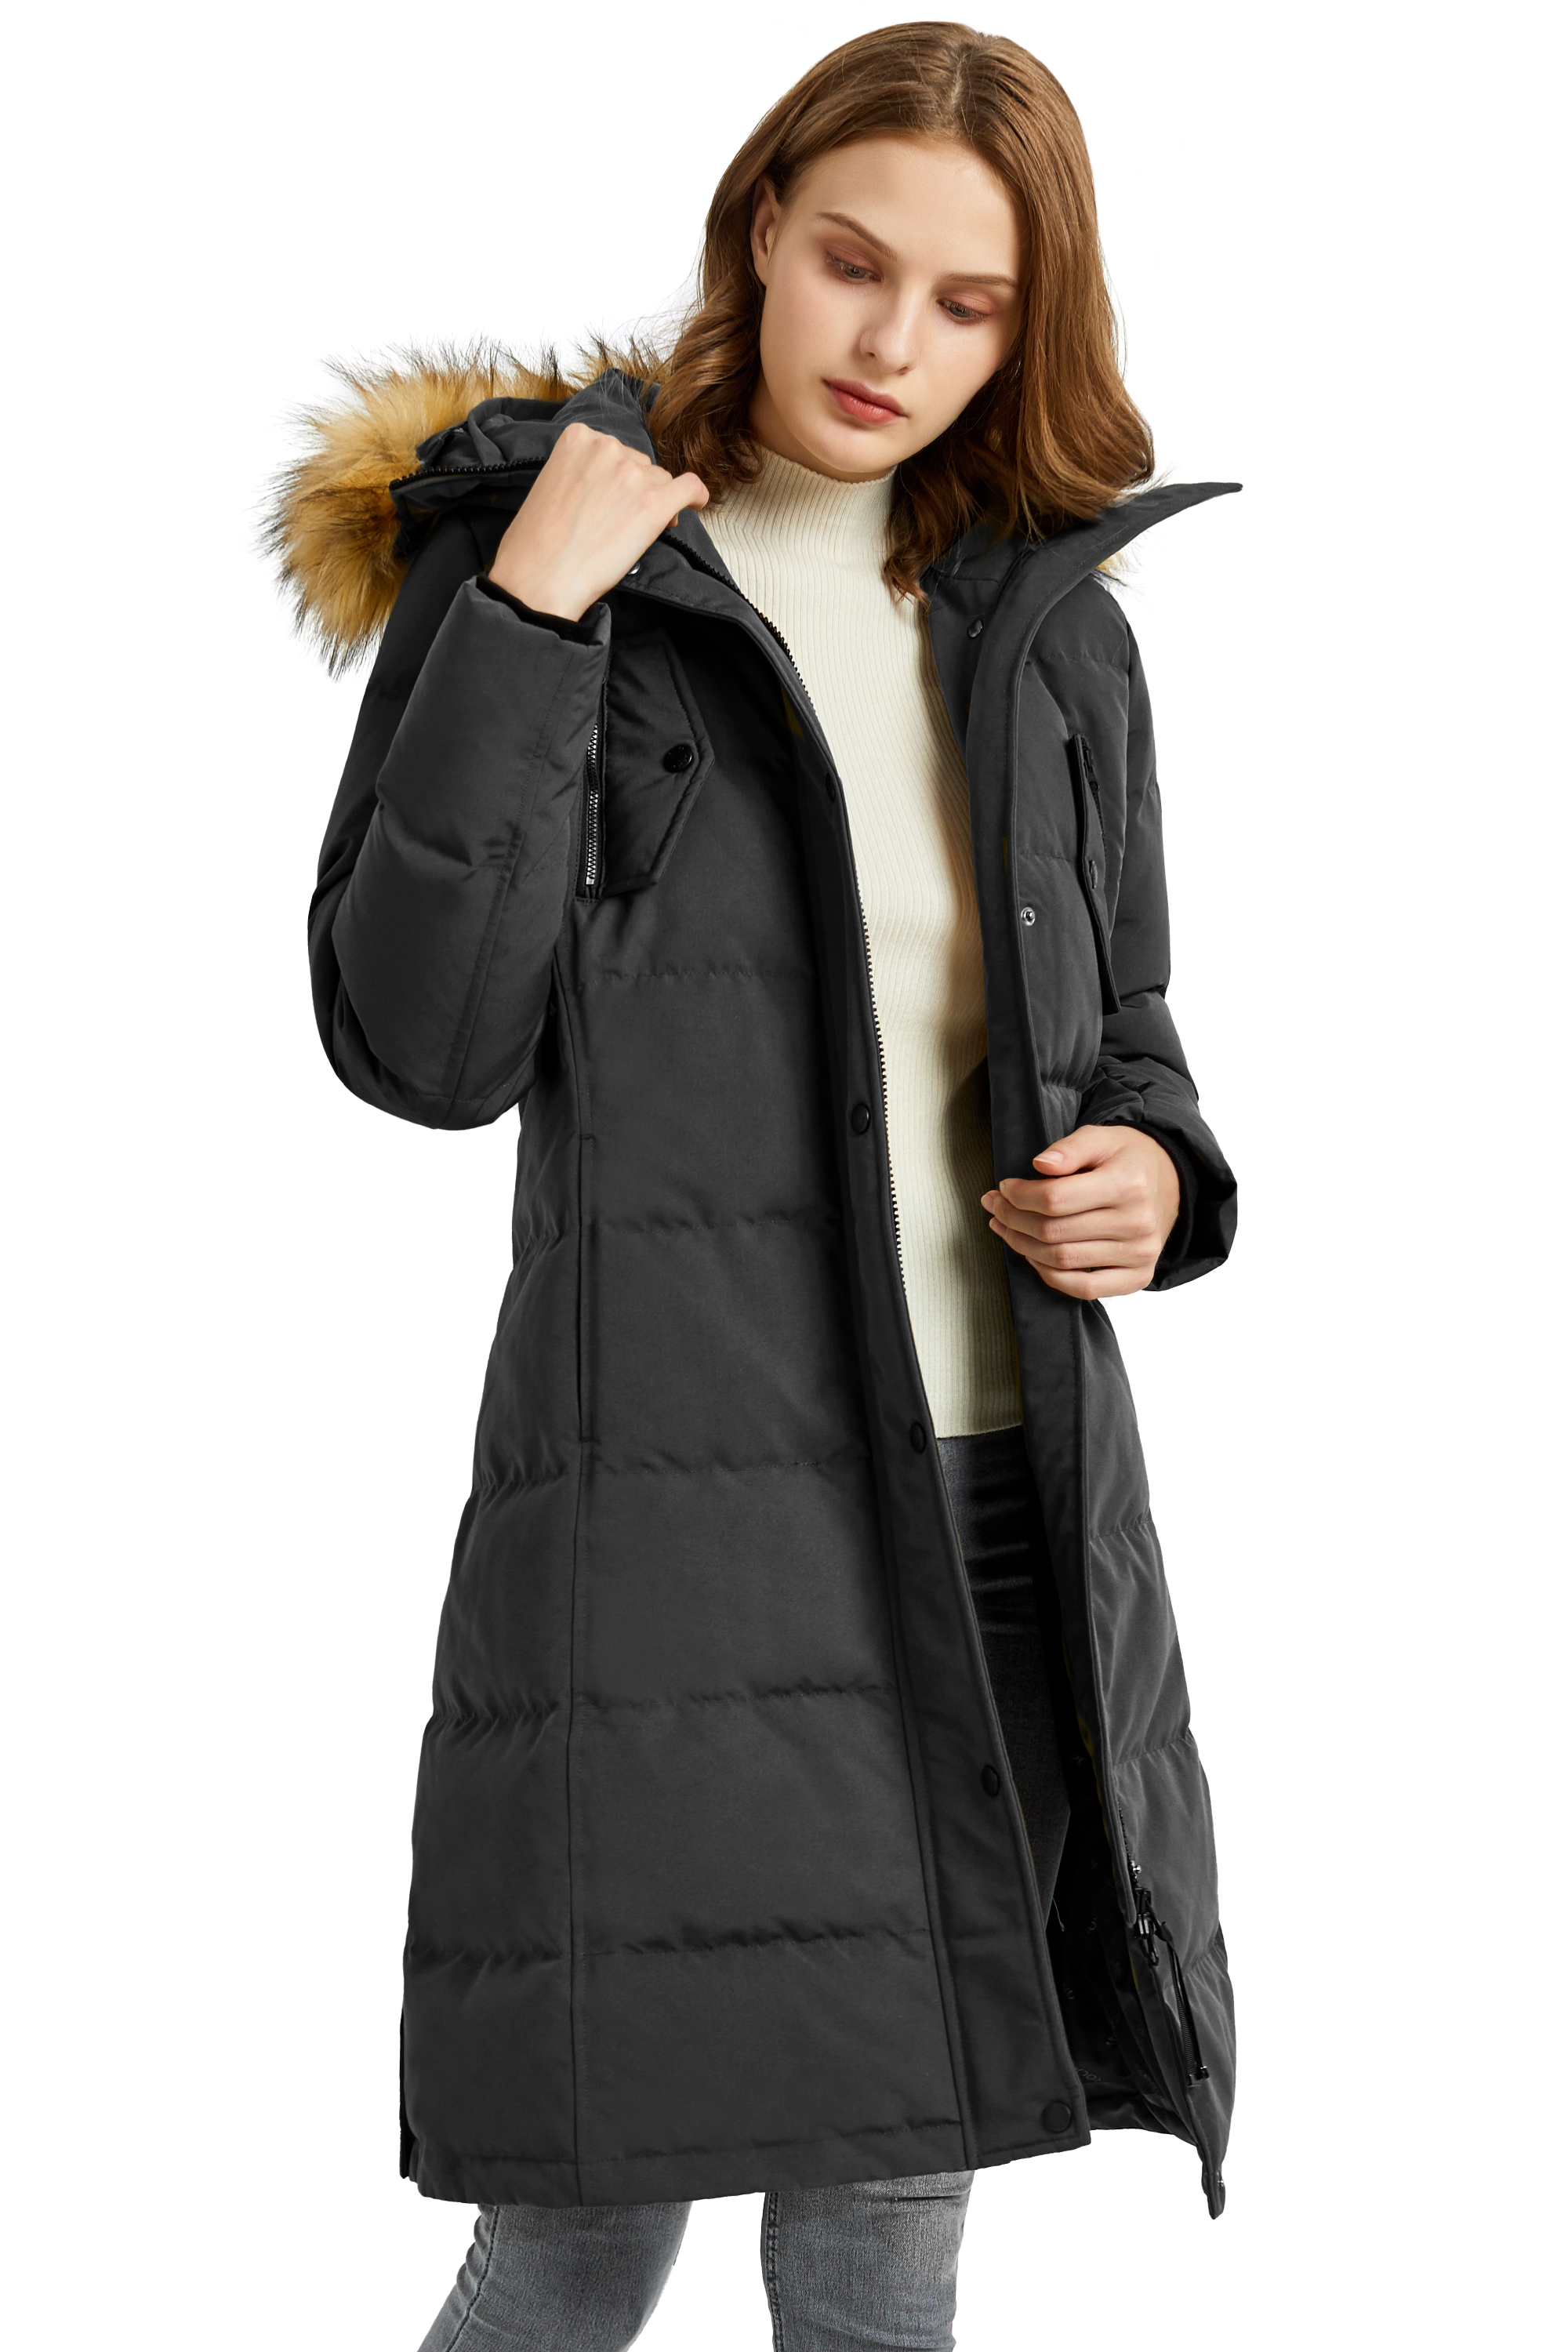 Orolay Women's Down Jacket Winter Long Coat Windproof Puffer Jacket with Fur Hood - image 3 of 5